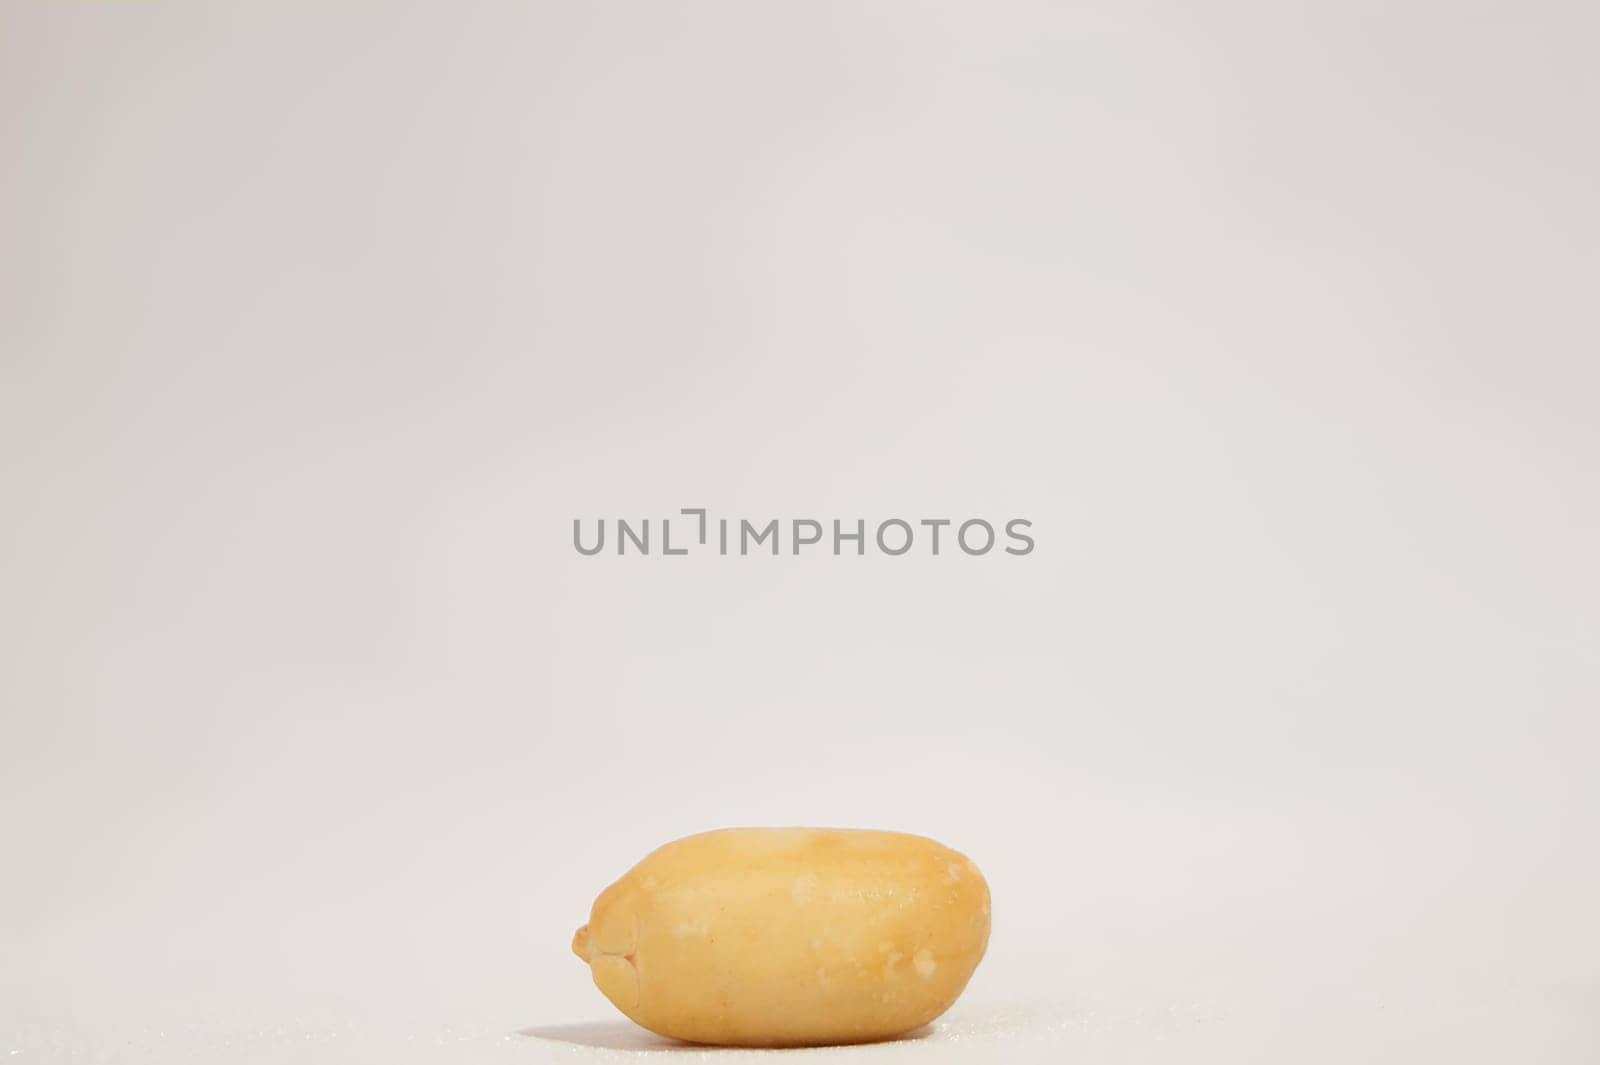 A Single Peanut in the Shell. High quality photo